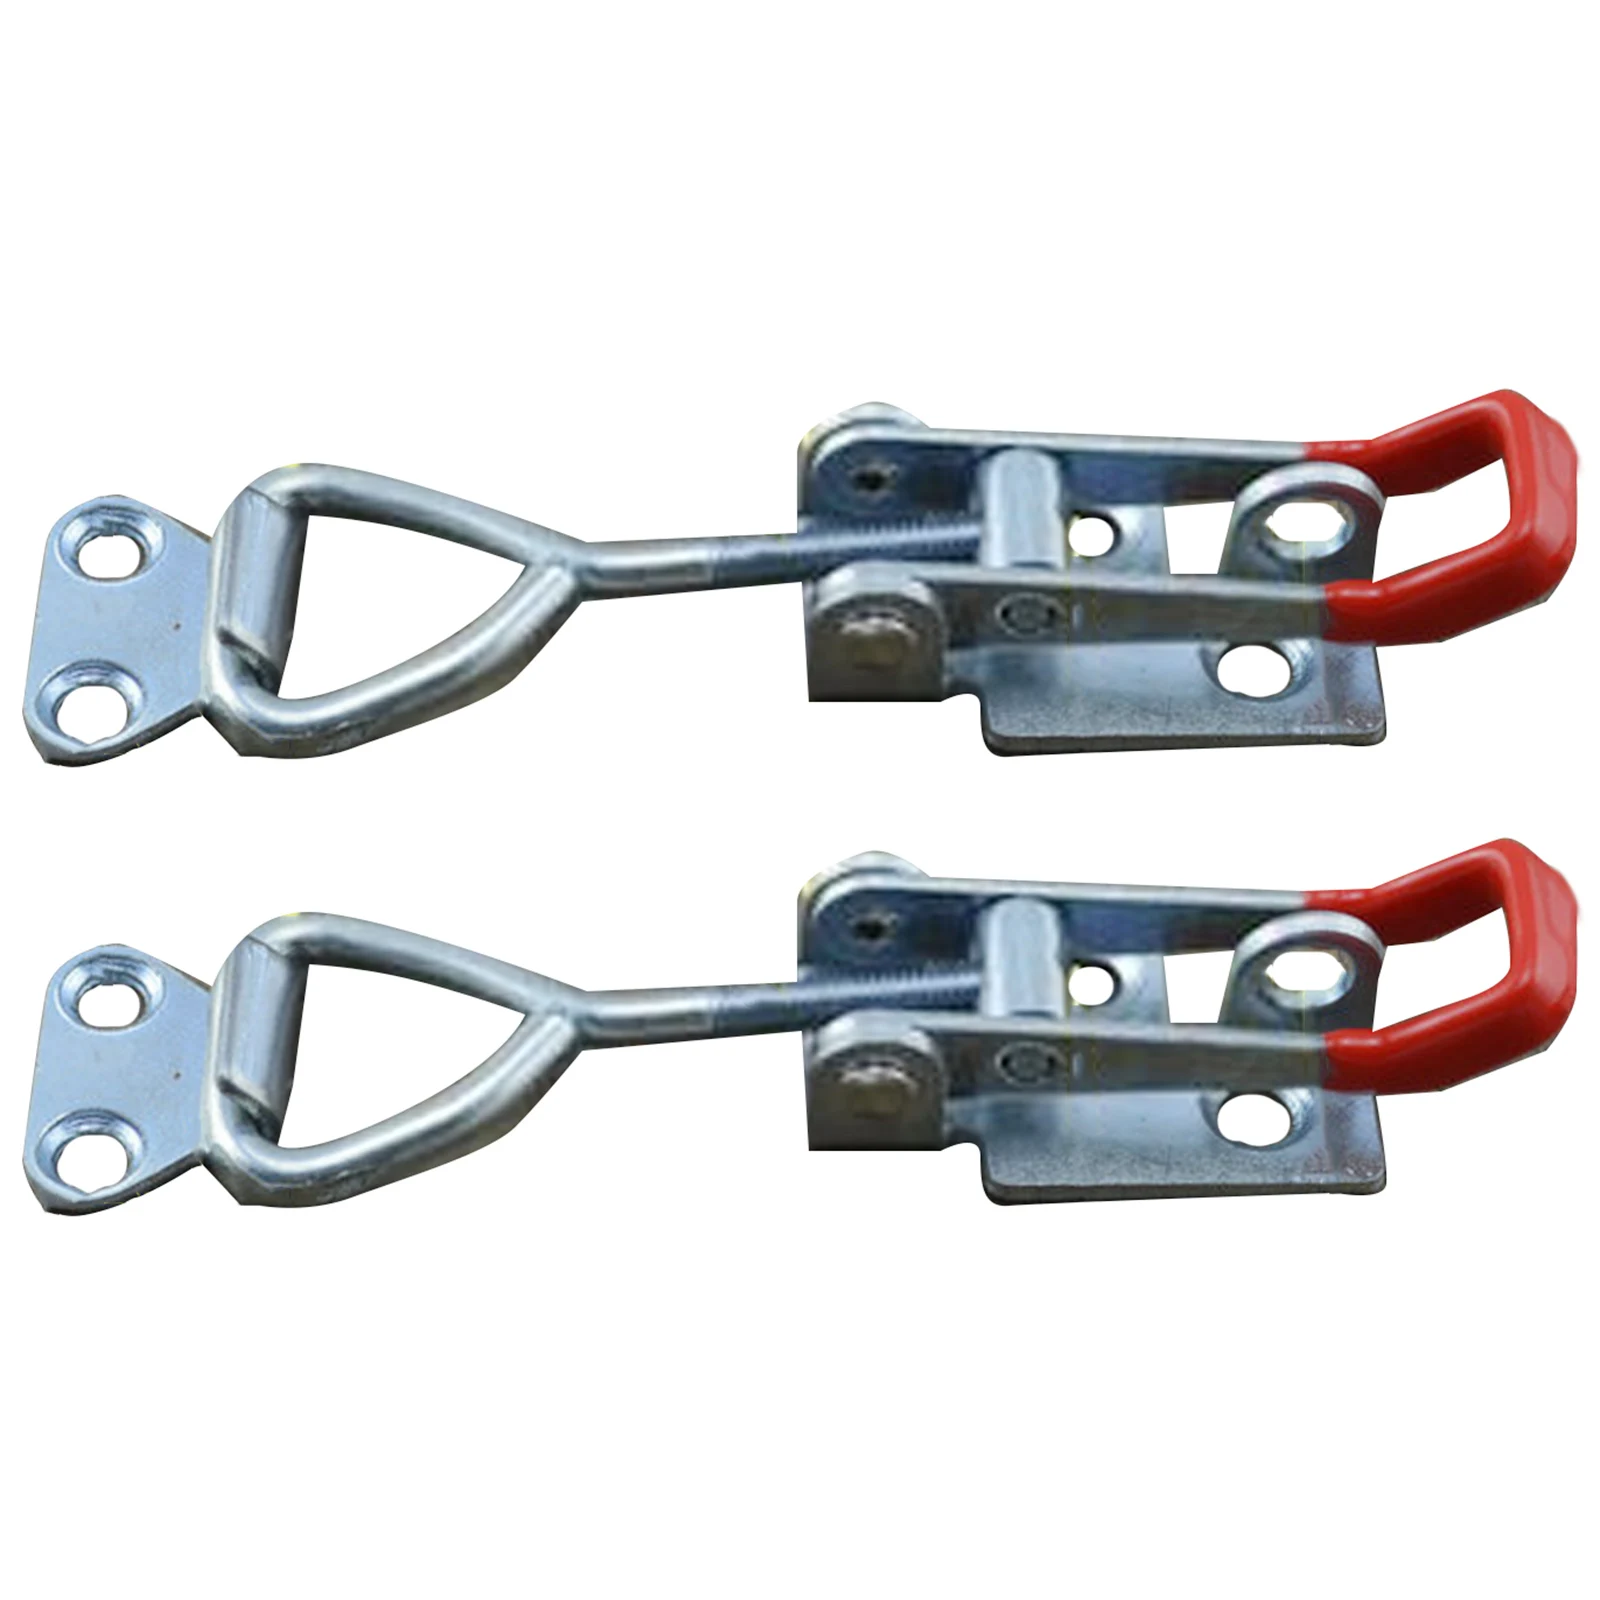 

2pcs Adjustable Toggle Clamp Stainless Steel Door Bolt Type Fixture Quick Clamp For Doors Household Lock Clips Hand Tools